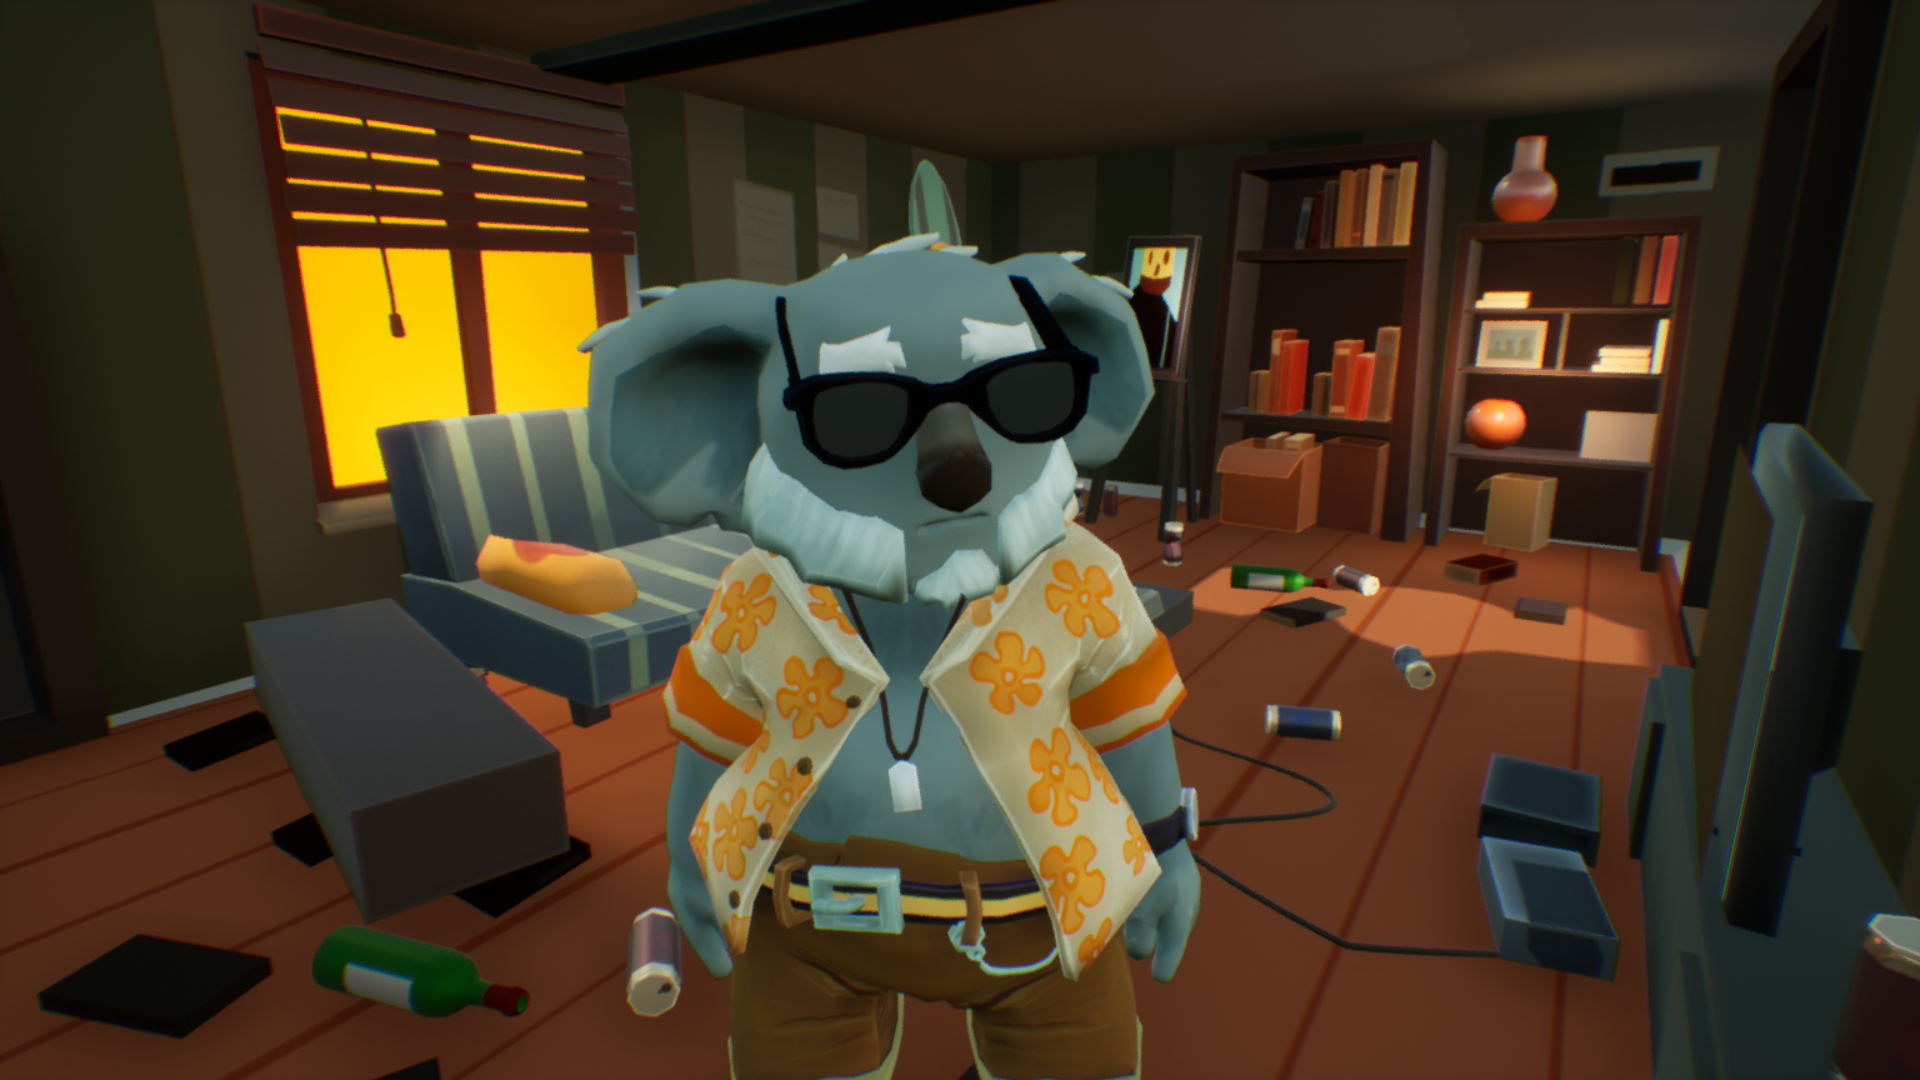 This Aussie video game lets you play as a hungover koala detective